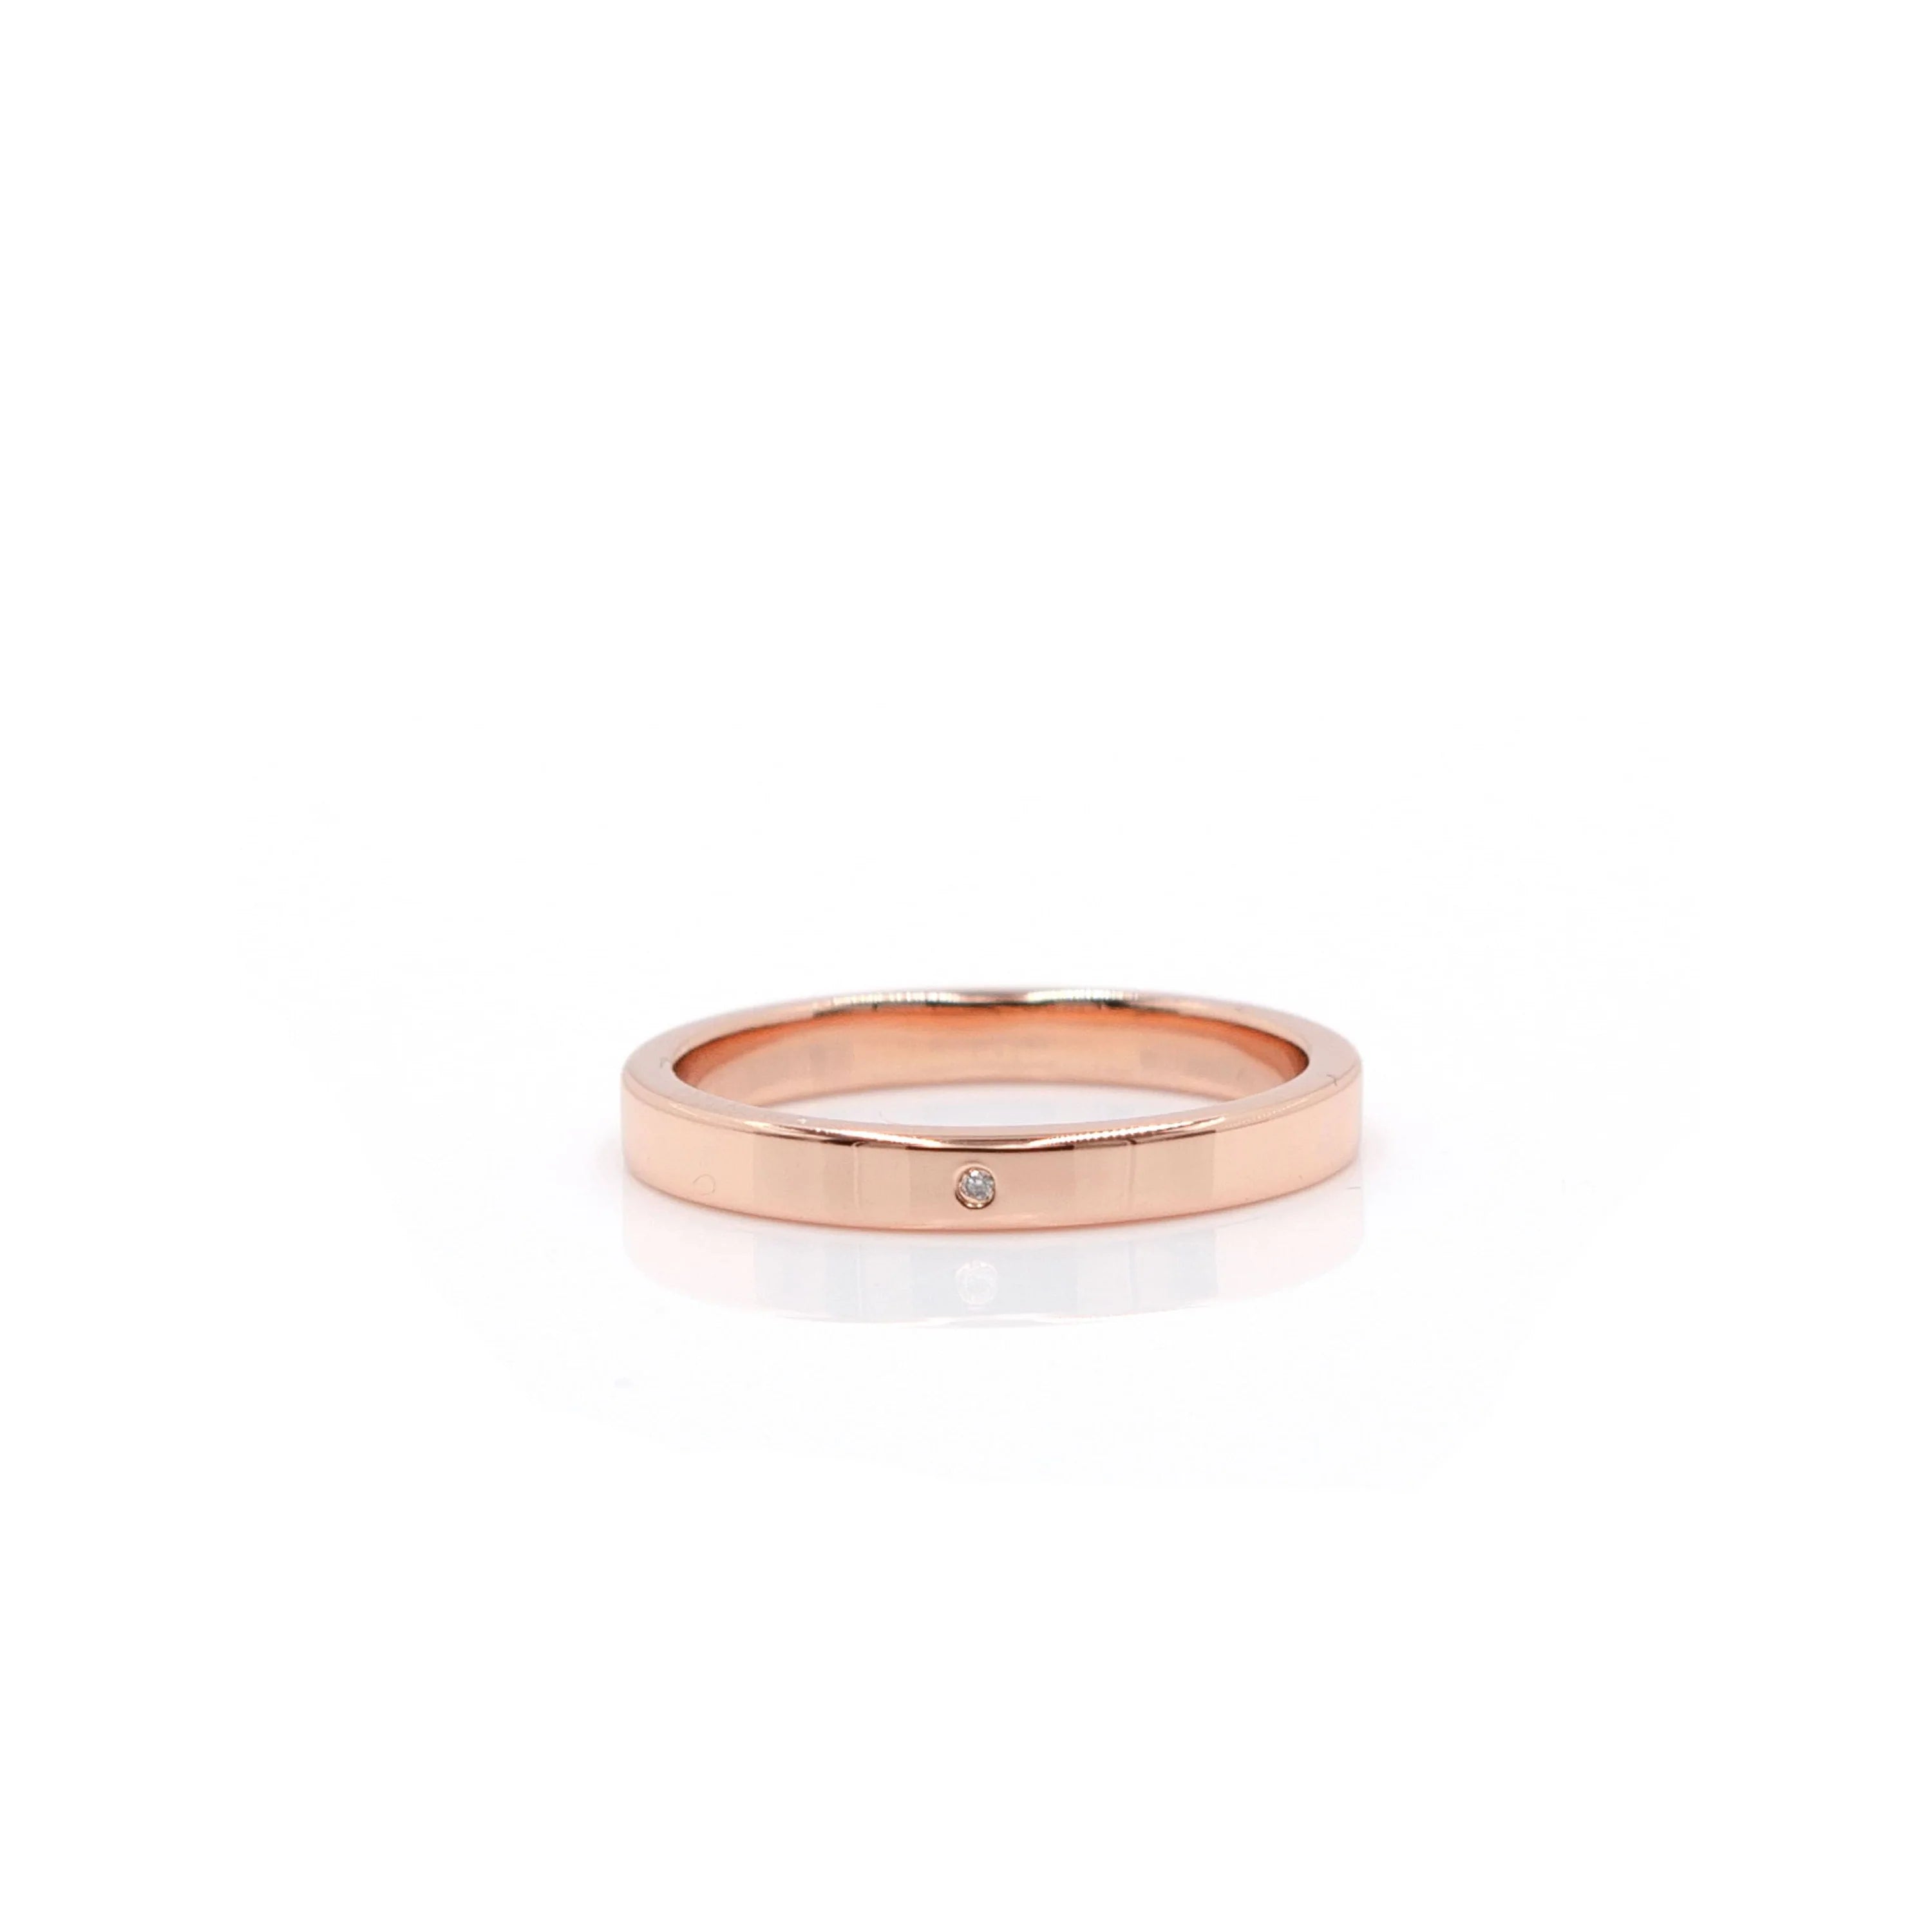 "D'Amour" Rose Gold Diamond Ring